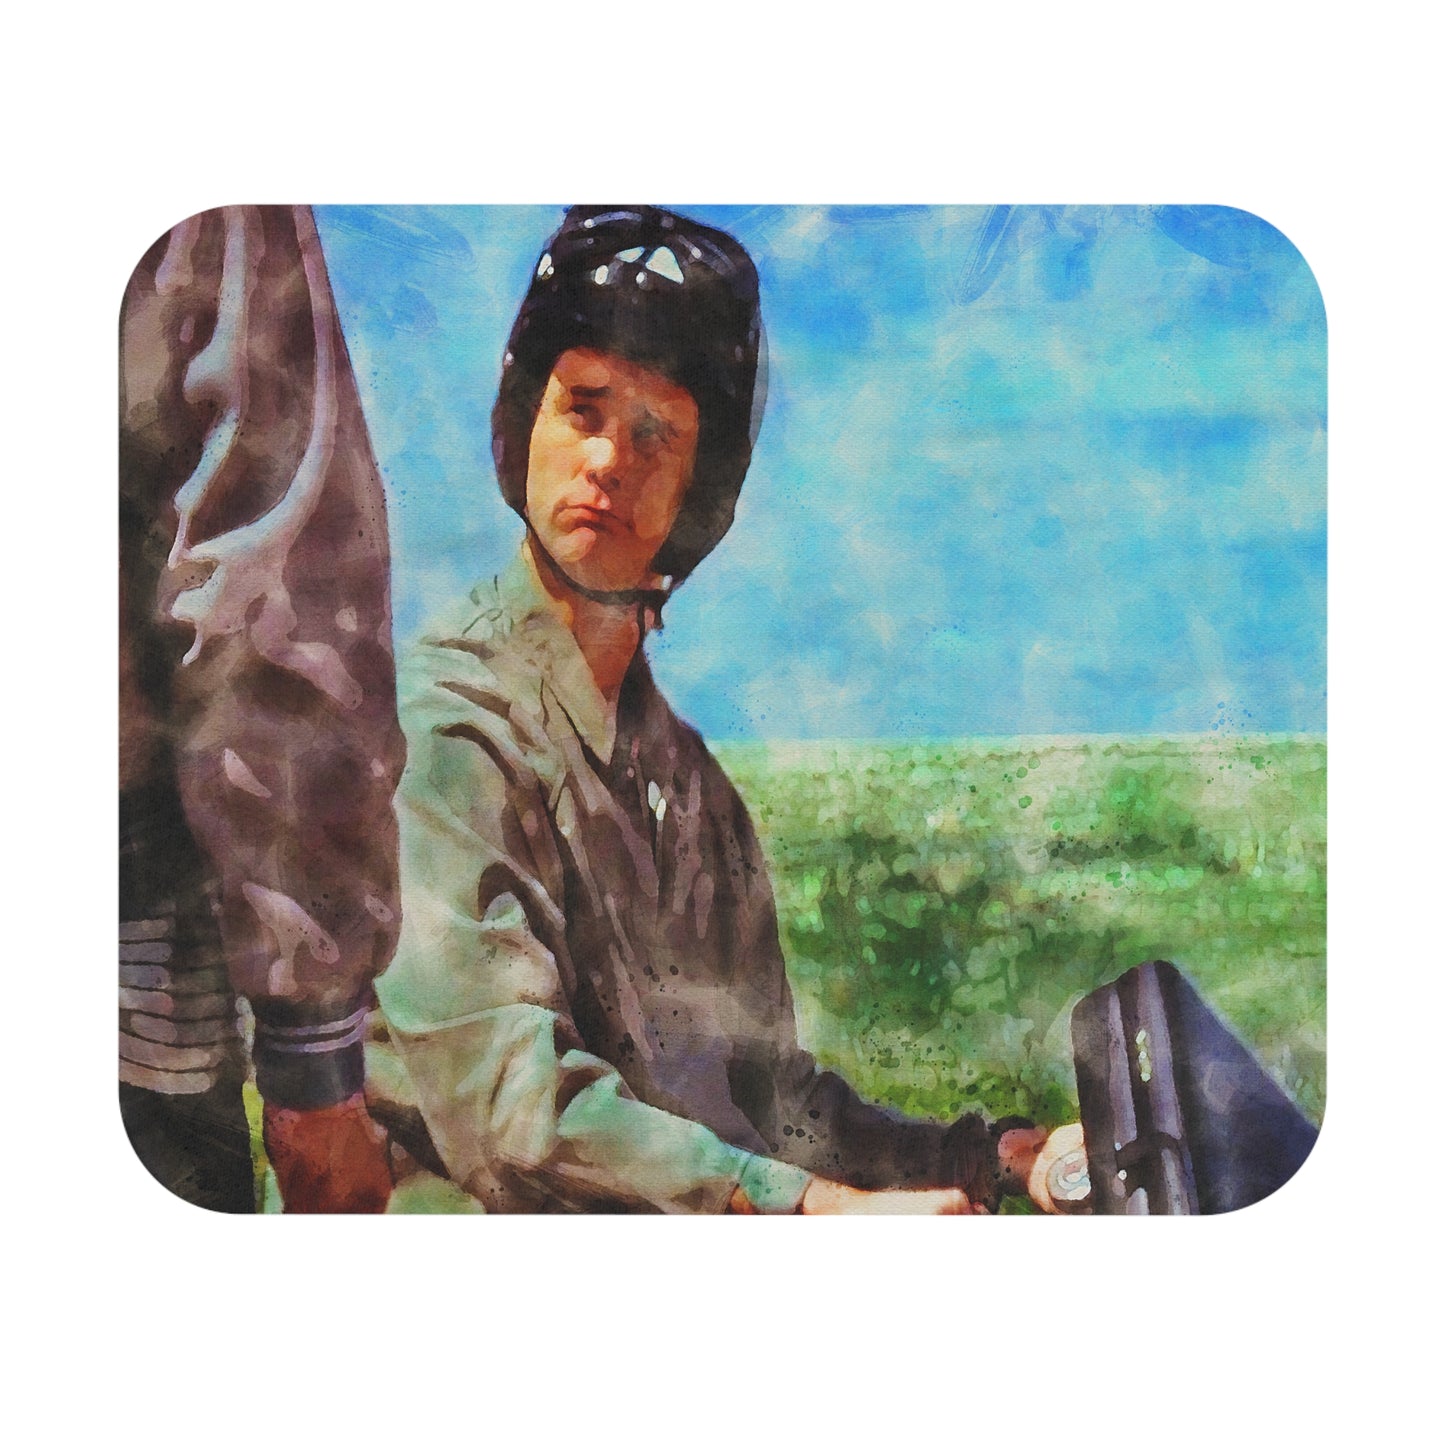 Dumb and Dumber Inspired "Totally Redeemed Yourself" Mouse Pad - 9x8